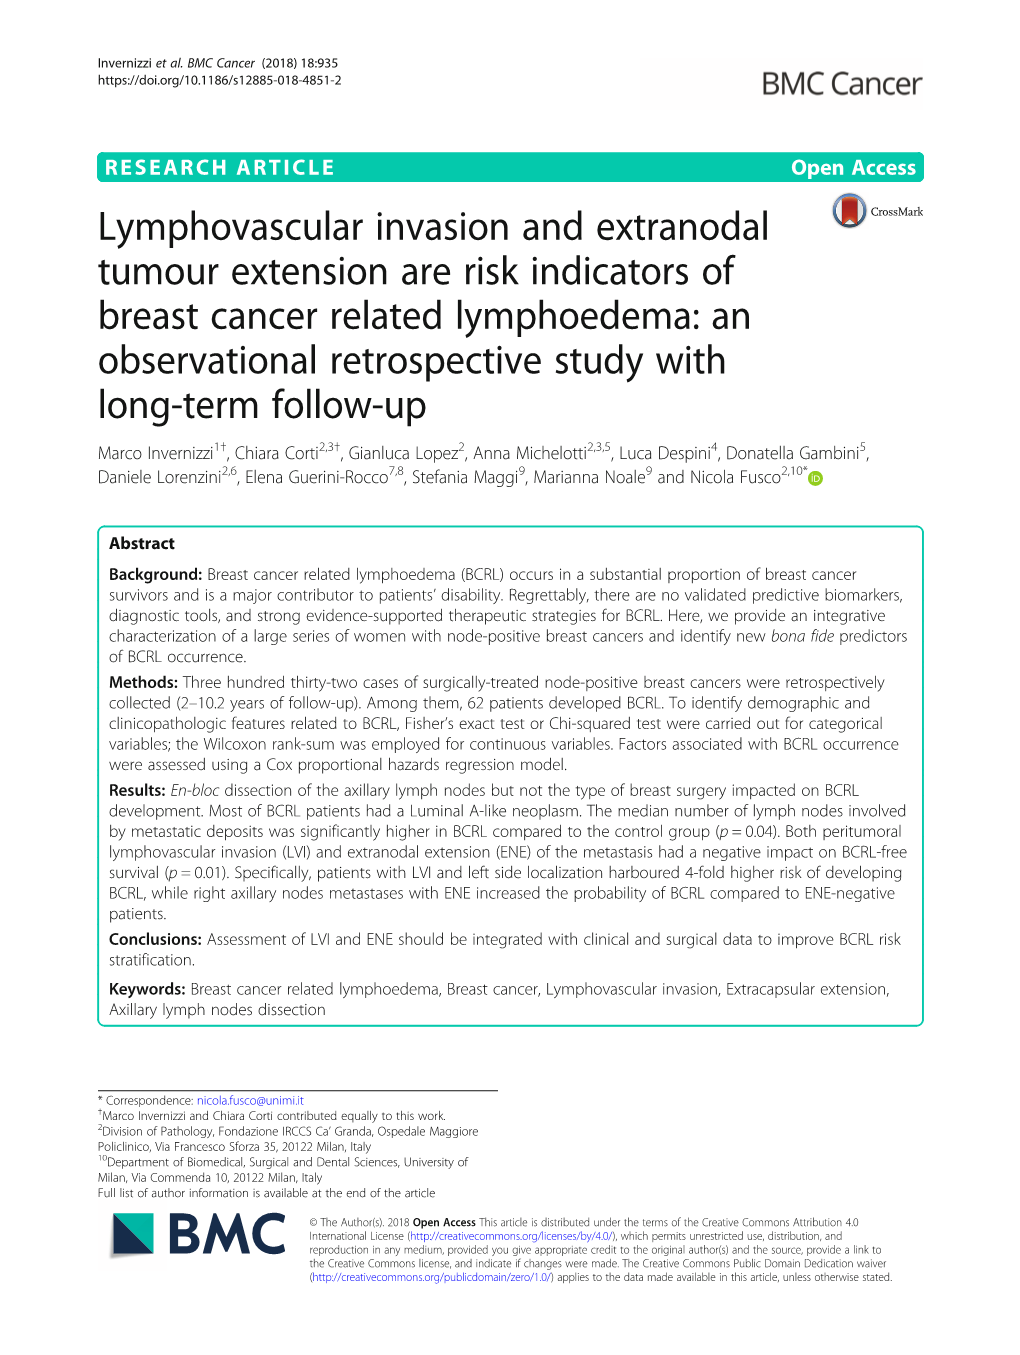 Lymphovascular Invasion and Extranodal Tumour Extension Are Risk Indicators of Breast Cancer Related Lymphoedema: an Observation